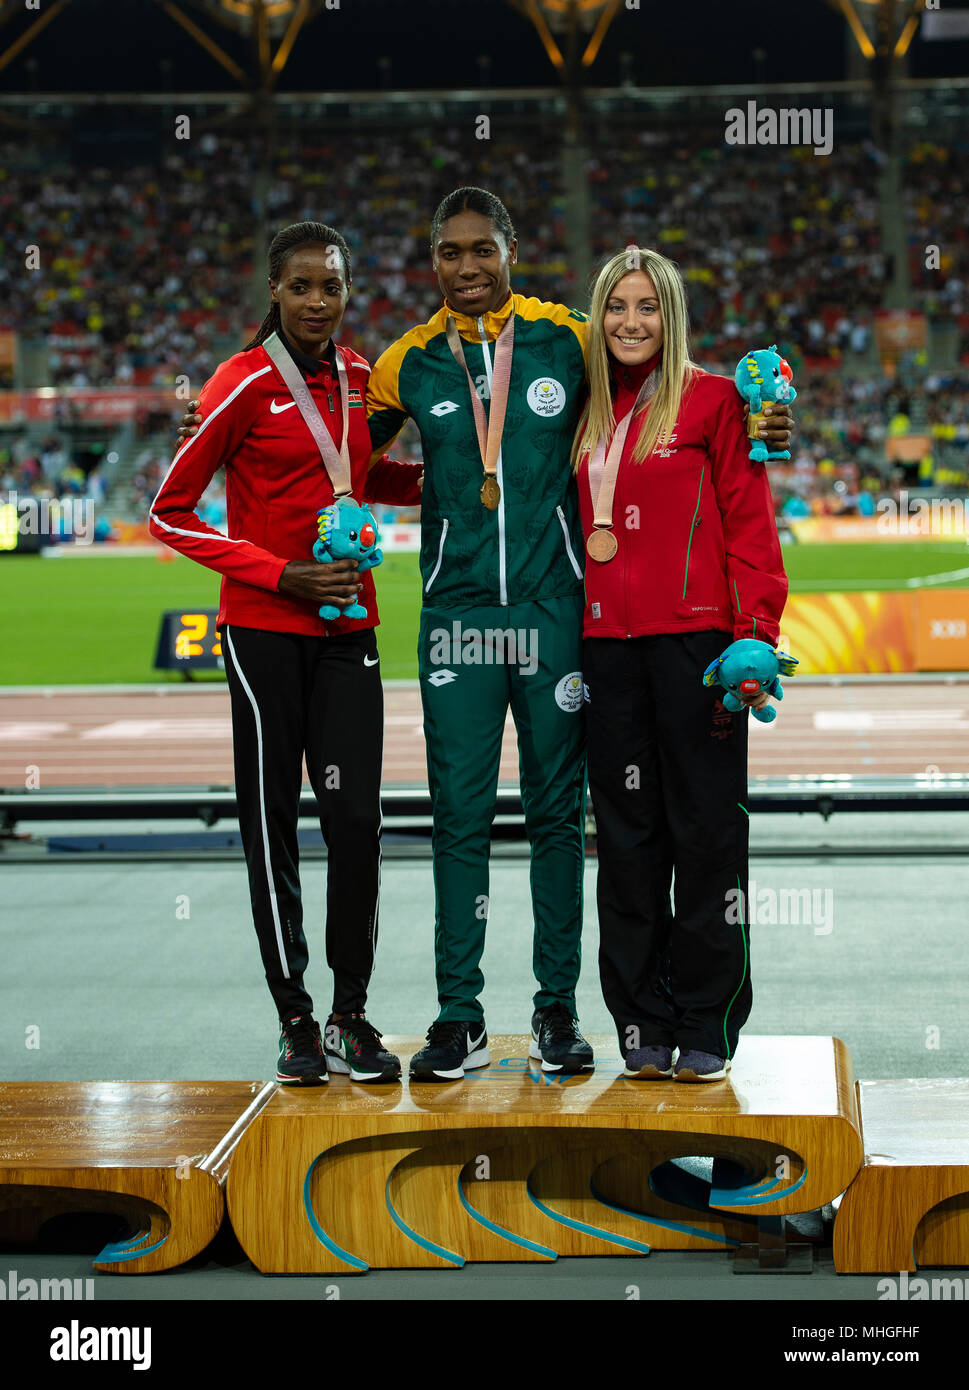 Women's 1500m Medal Ceremony-Commonwealth Games 2018 Stock Photo